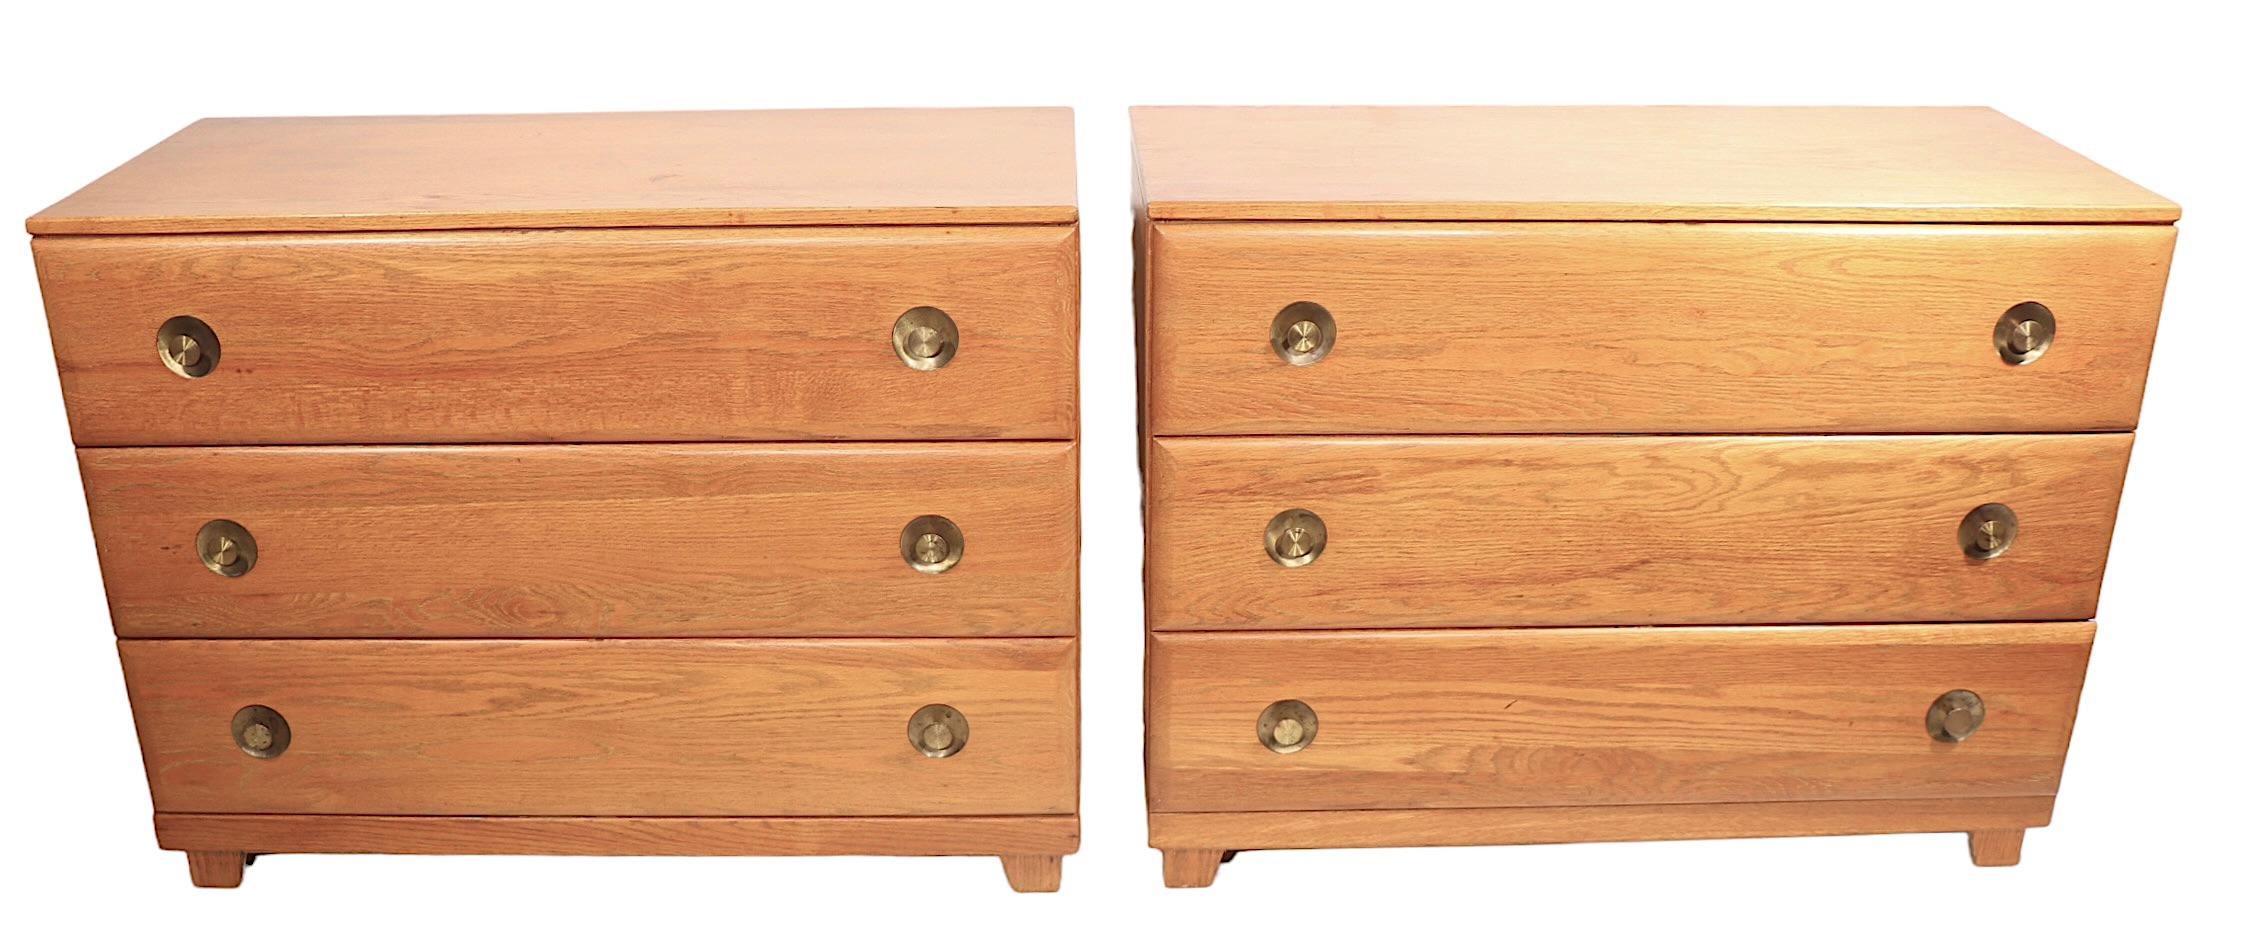 Pr. Mid Century  Bachelors Chests in Cerused Oak with Brass Pulls C 1950's For Sale 4